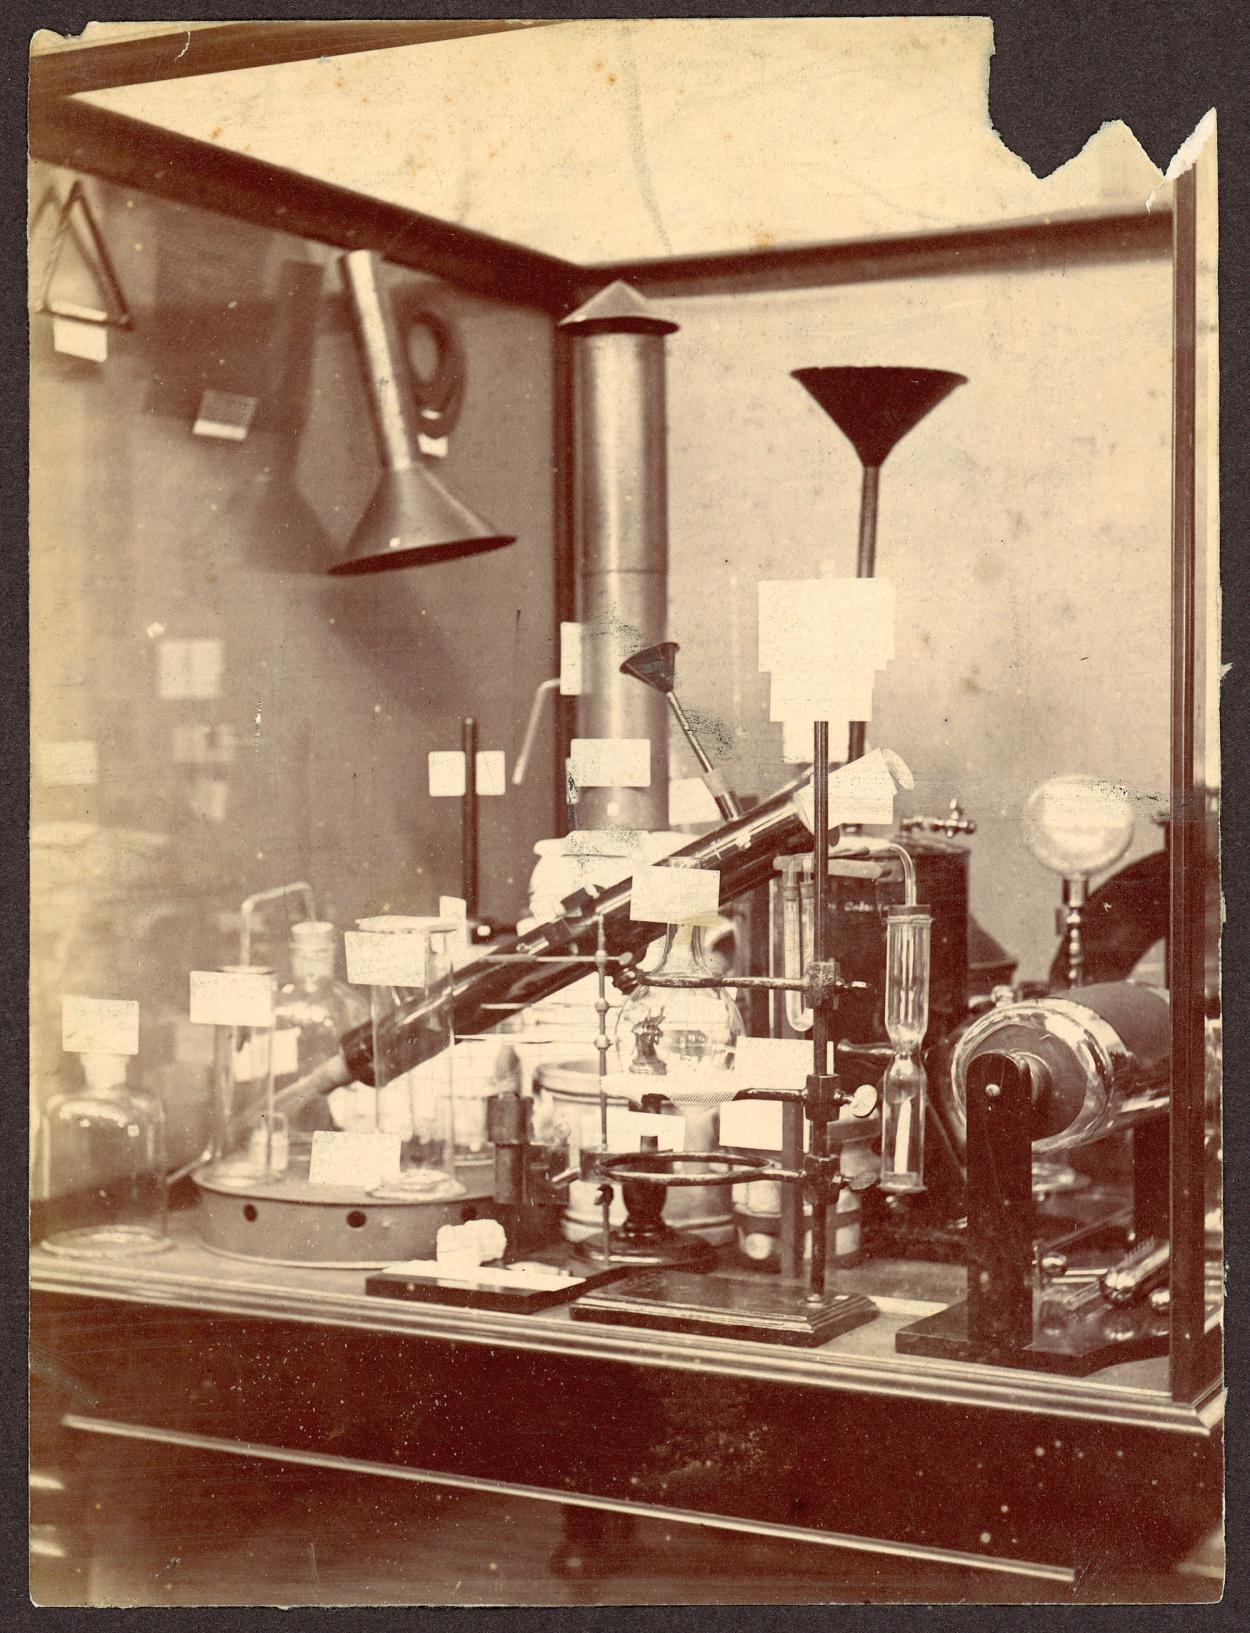 Sepia photograph of chemical equipment inside display case